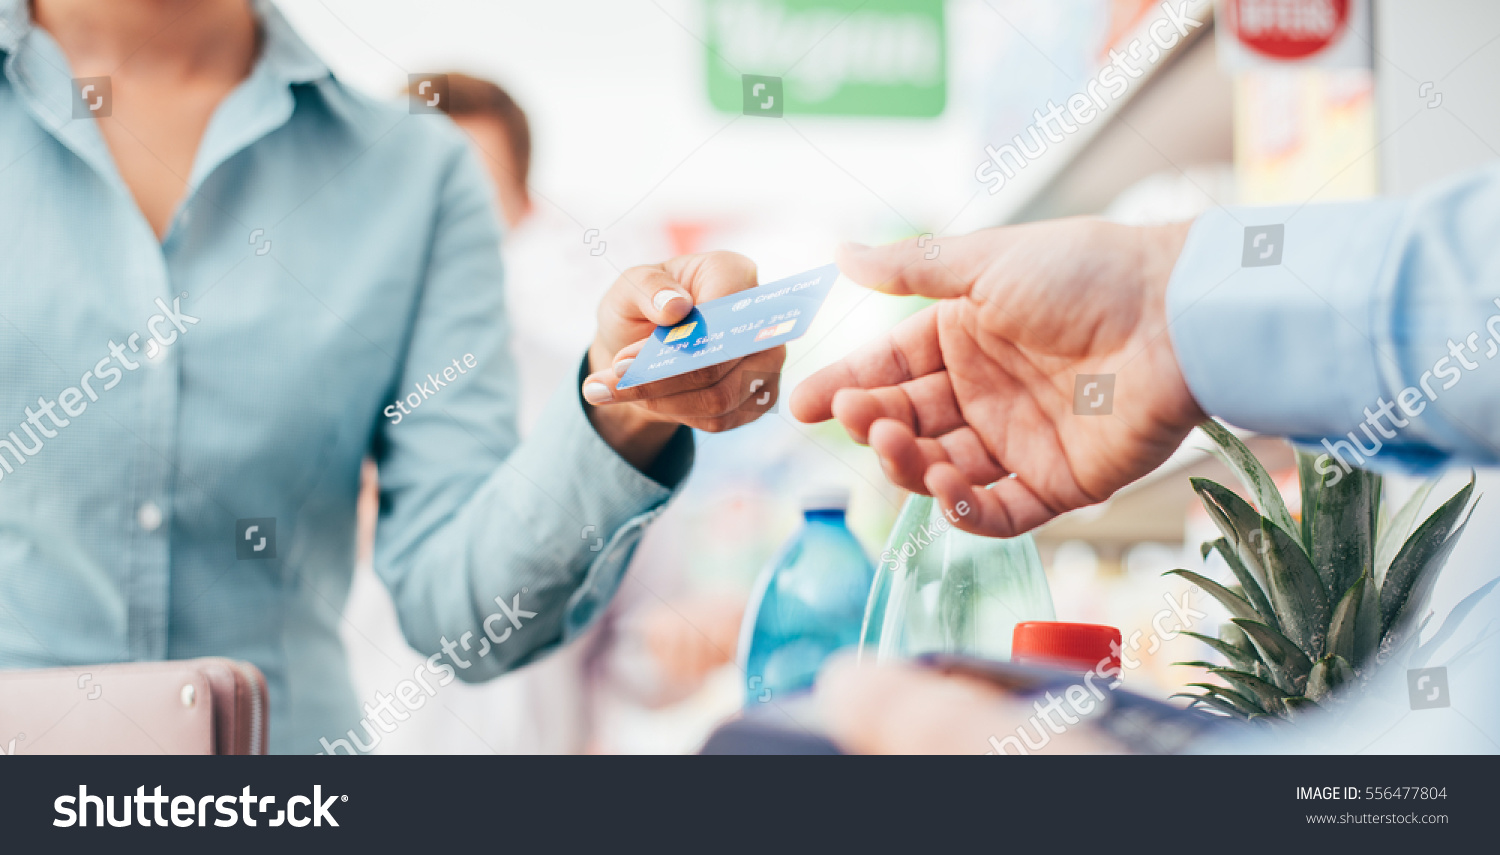 A woman is giving a credit card to a man in a supermarket.